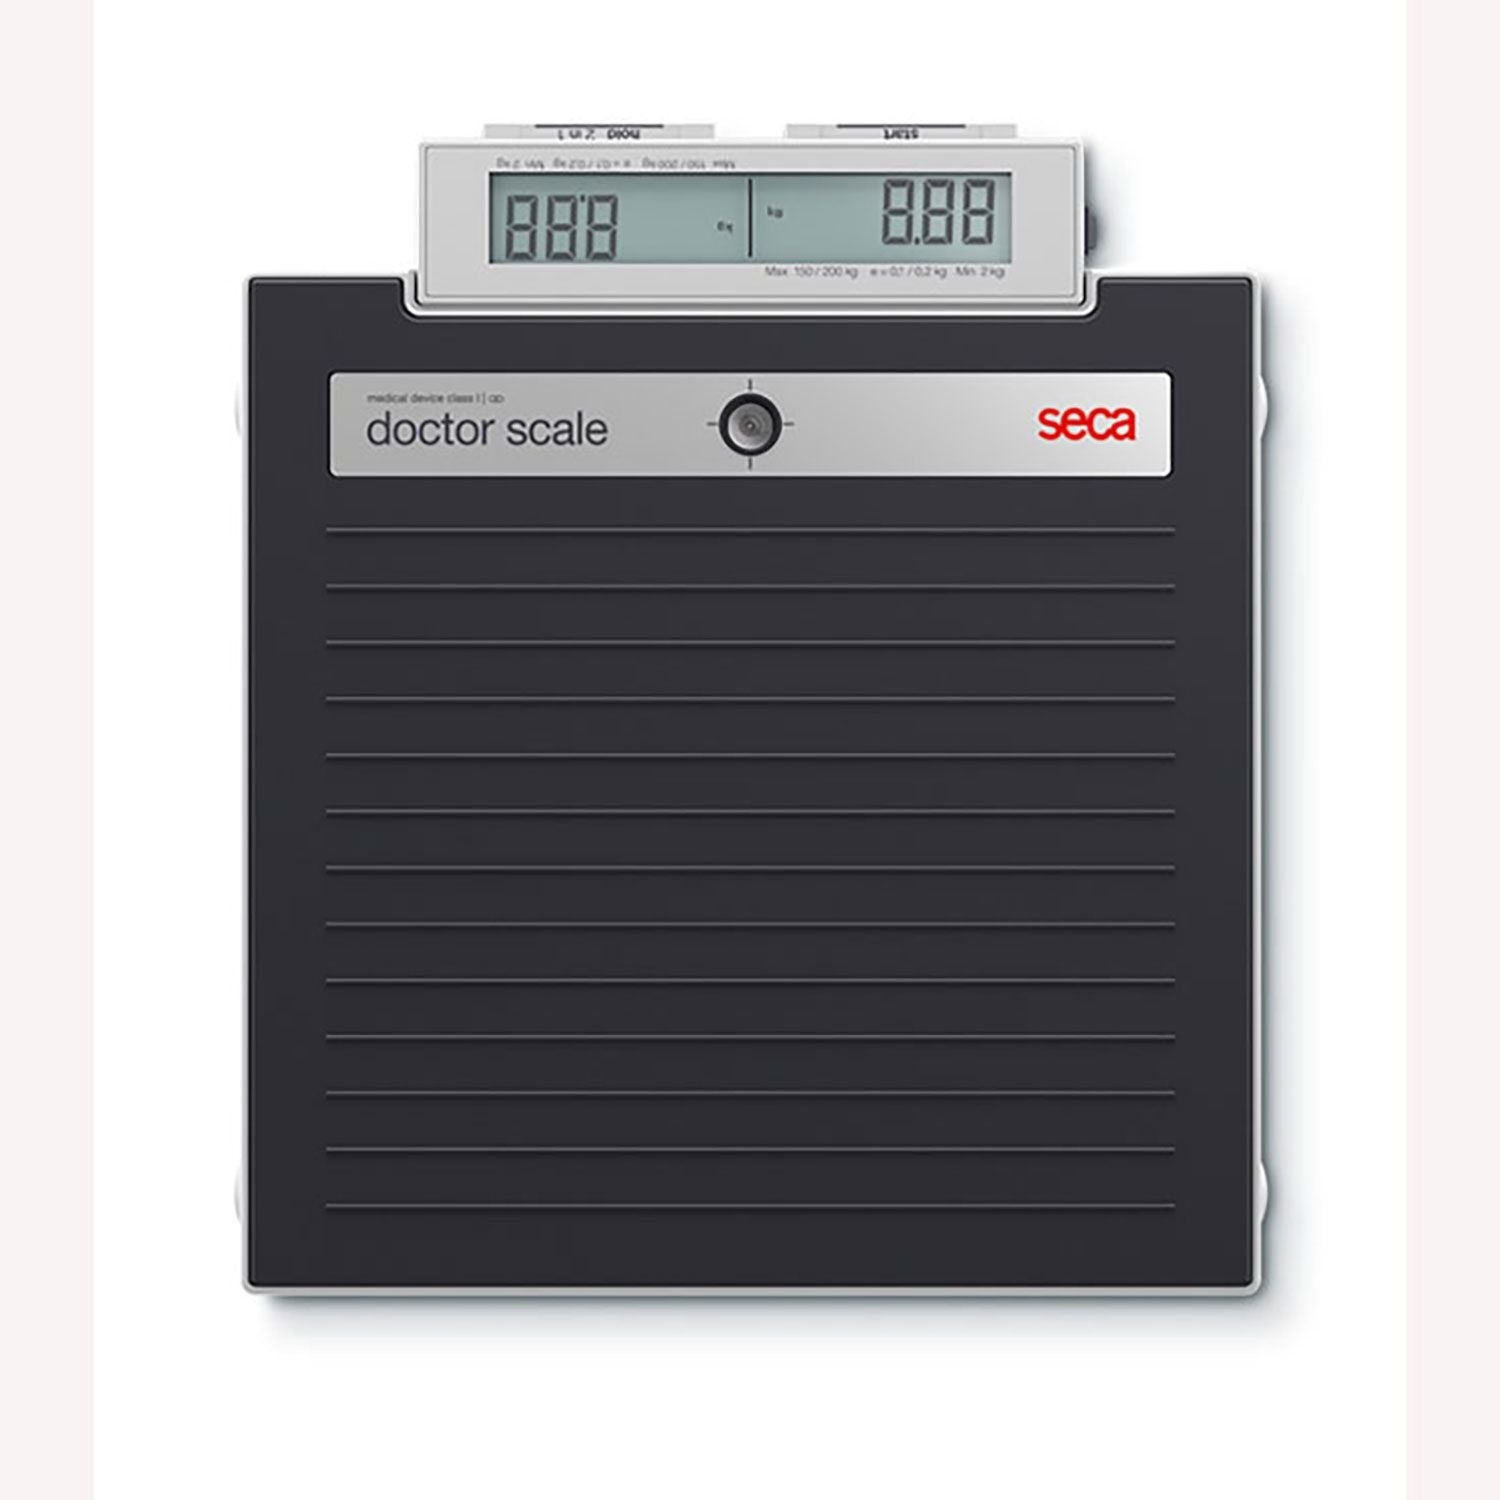 seca 878 Class III Digital Flat Scale with Foot Switches & Double Display